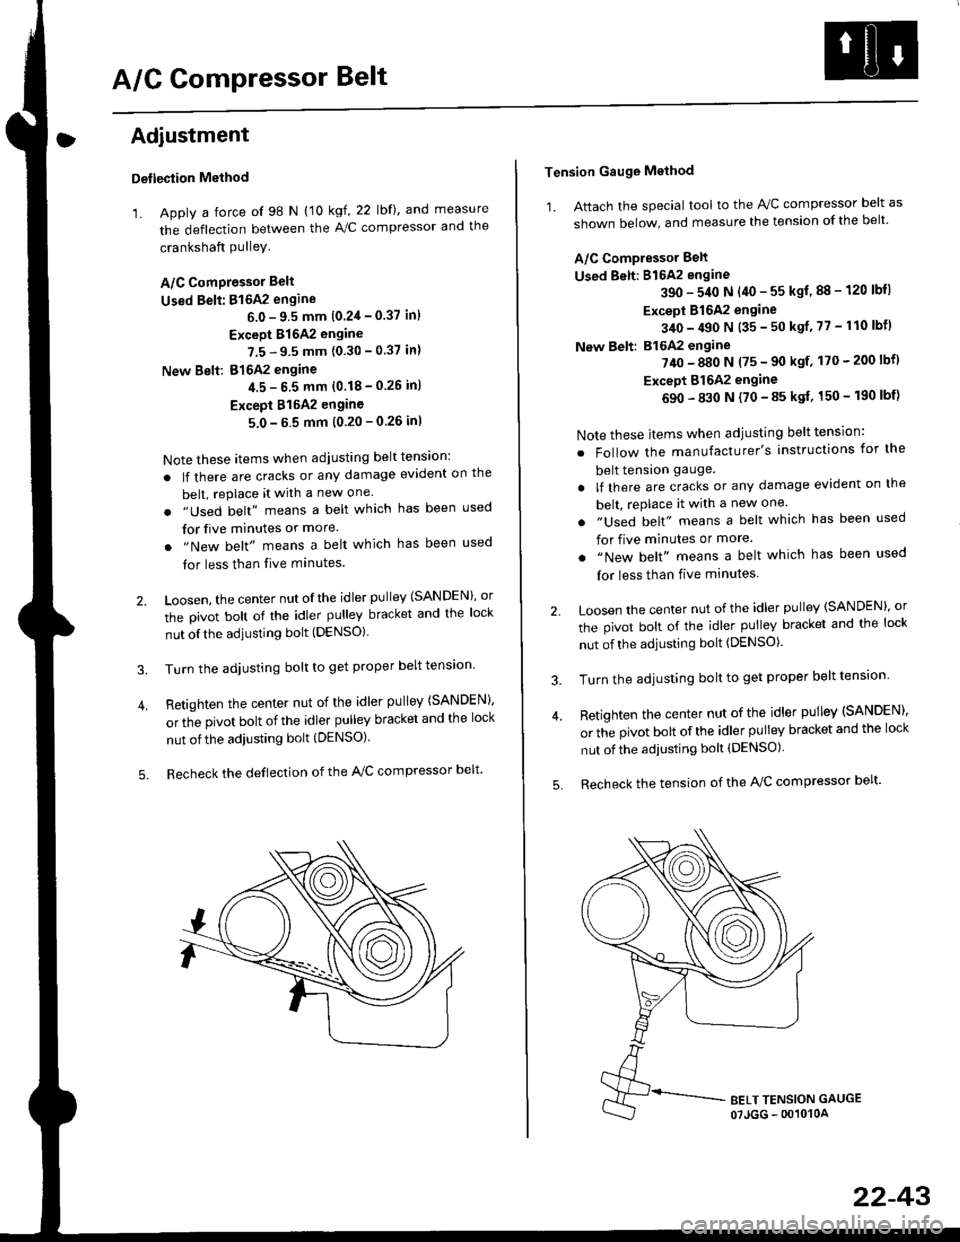 HONDA CIVIC 1997 6.G User Guide A/G GomPressor Belt
Adjustment
Detlection Method
1. Apply a force of 98 N (10 kgf, 22 lbf), and measure
the deflection between the A,/C compressor and the
crankshaft PulleY
A/C ComPressor Belt
Used B